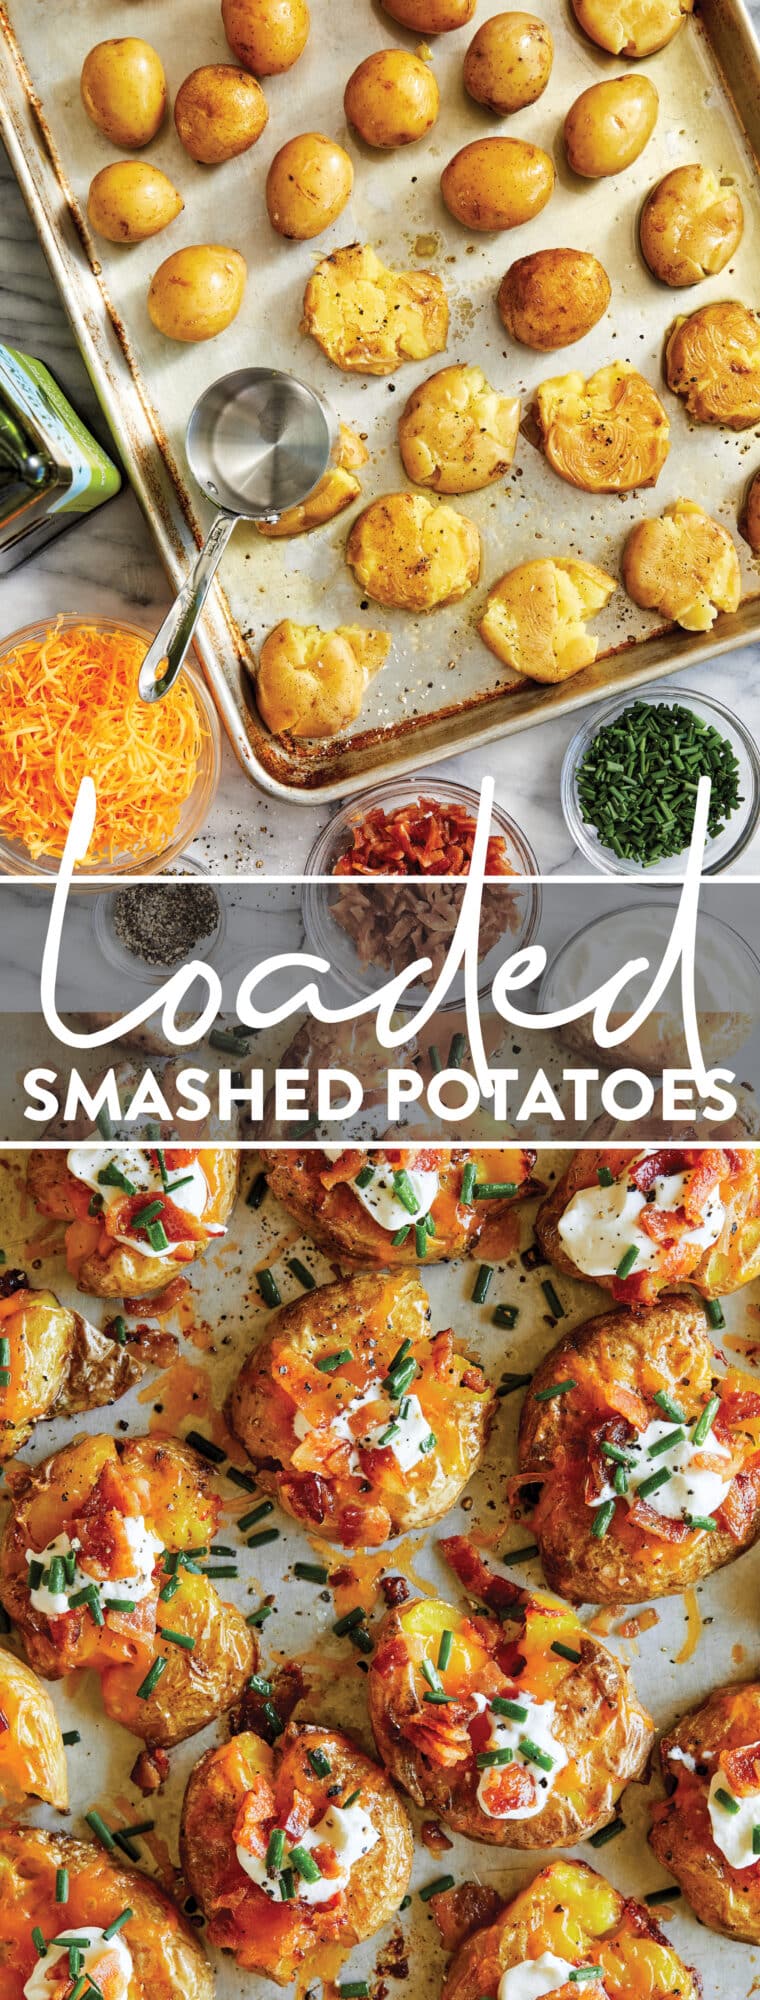 Loaded Smashed Potatoes – Damn Delicious